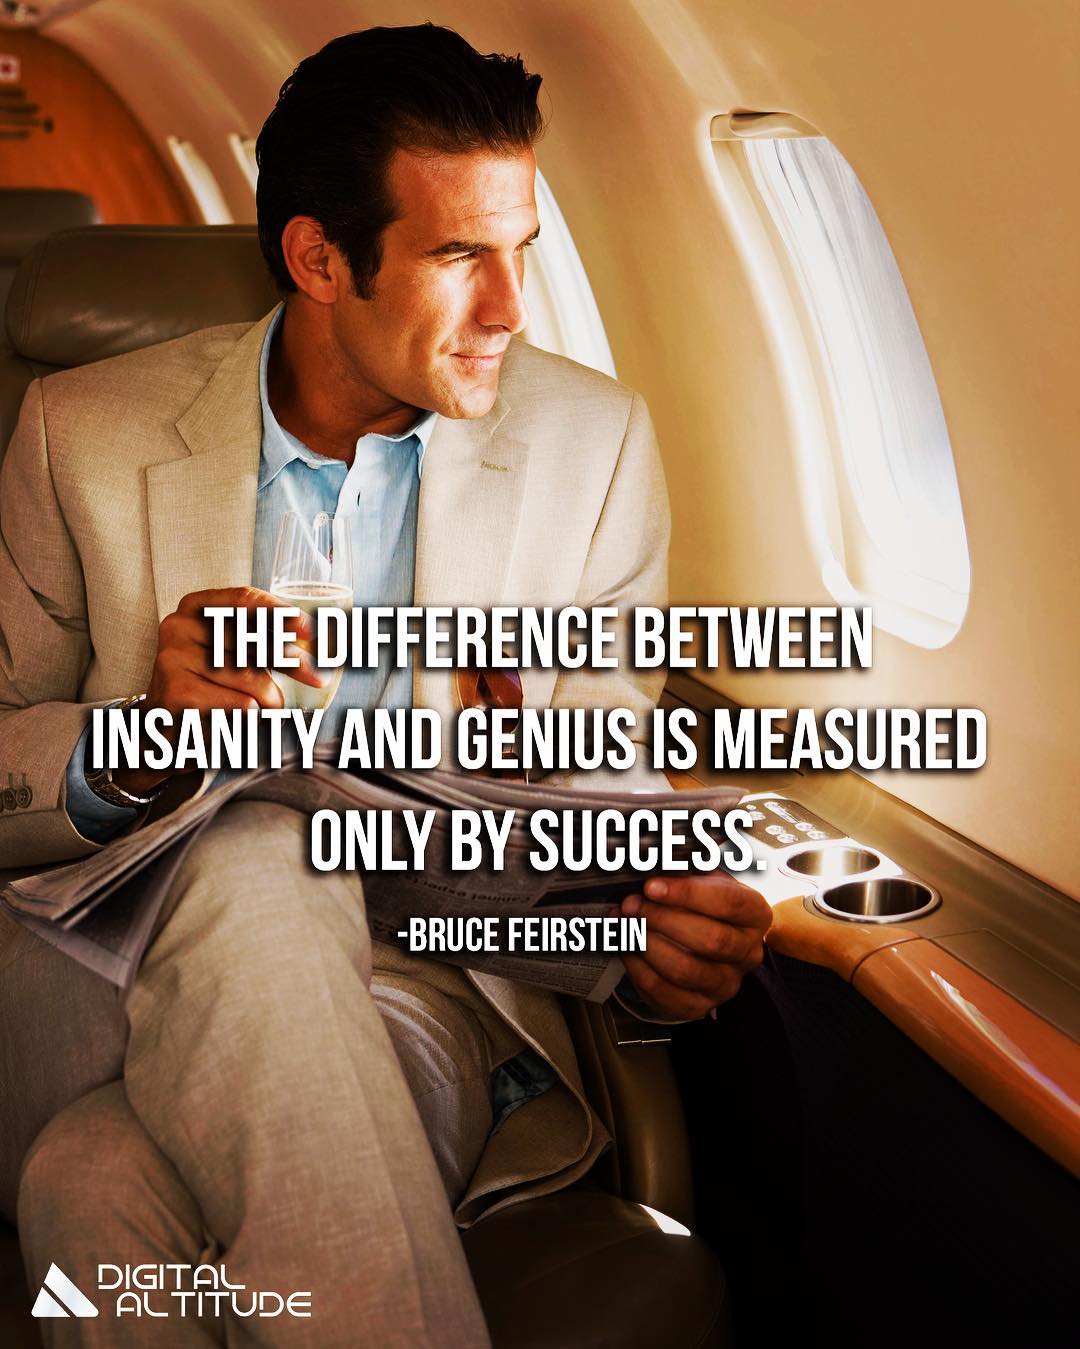 The difference between insanity and genius is measured only by success. - Bruce Feirstein